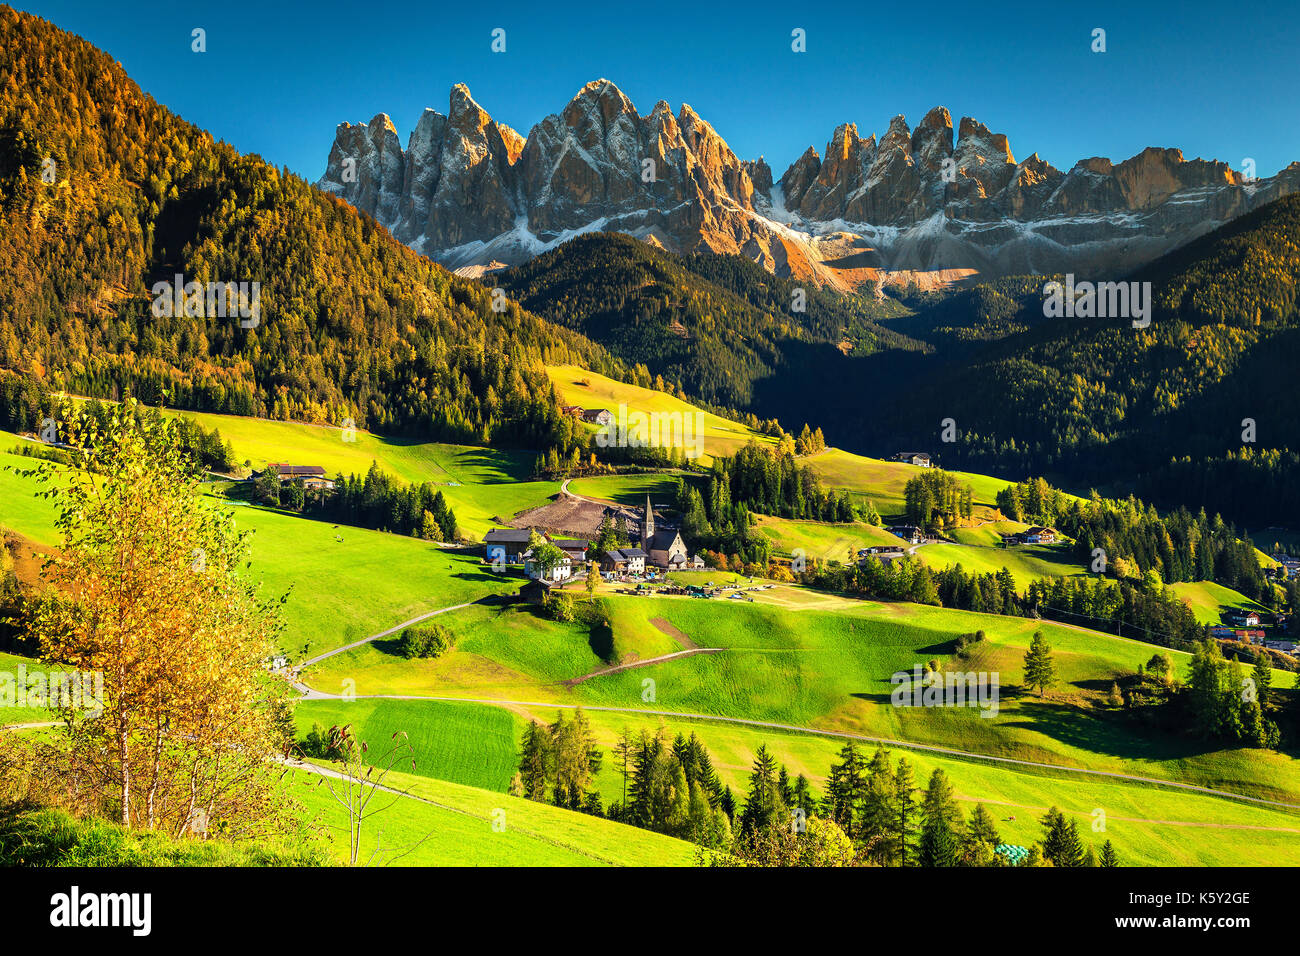 Fabulous best alpine place of the world, Santa Maddalena village with magical Dolomites mountains in background, Val di Funes valley, Trentino Alto Ad Stock Photo